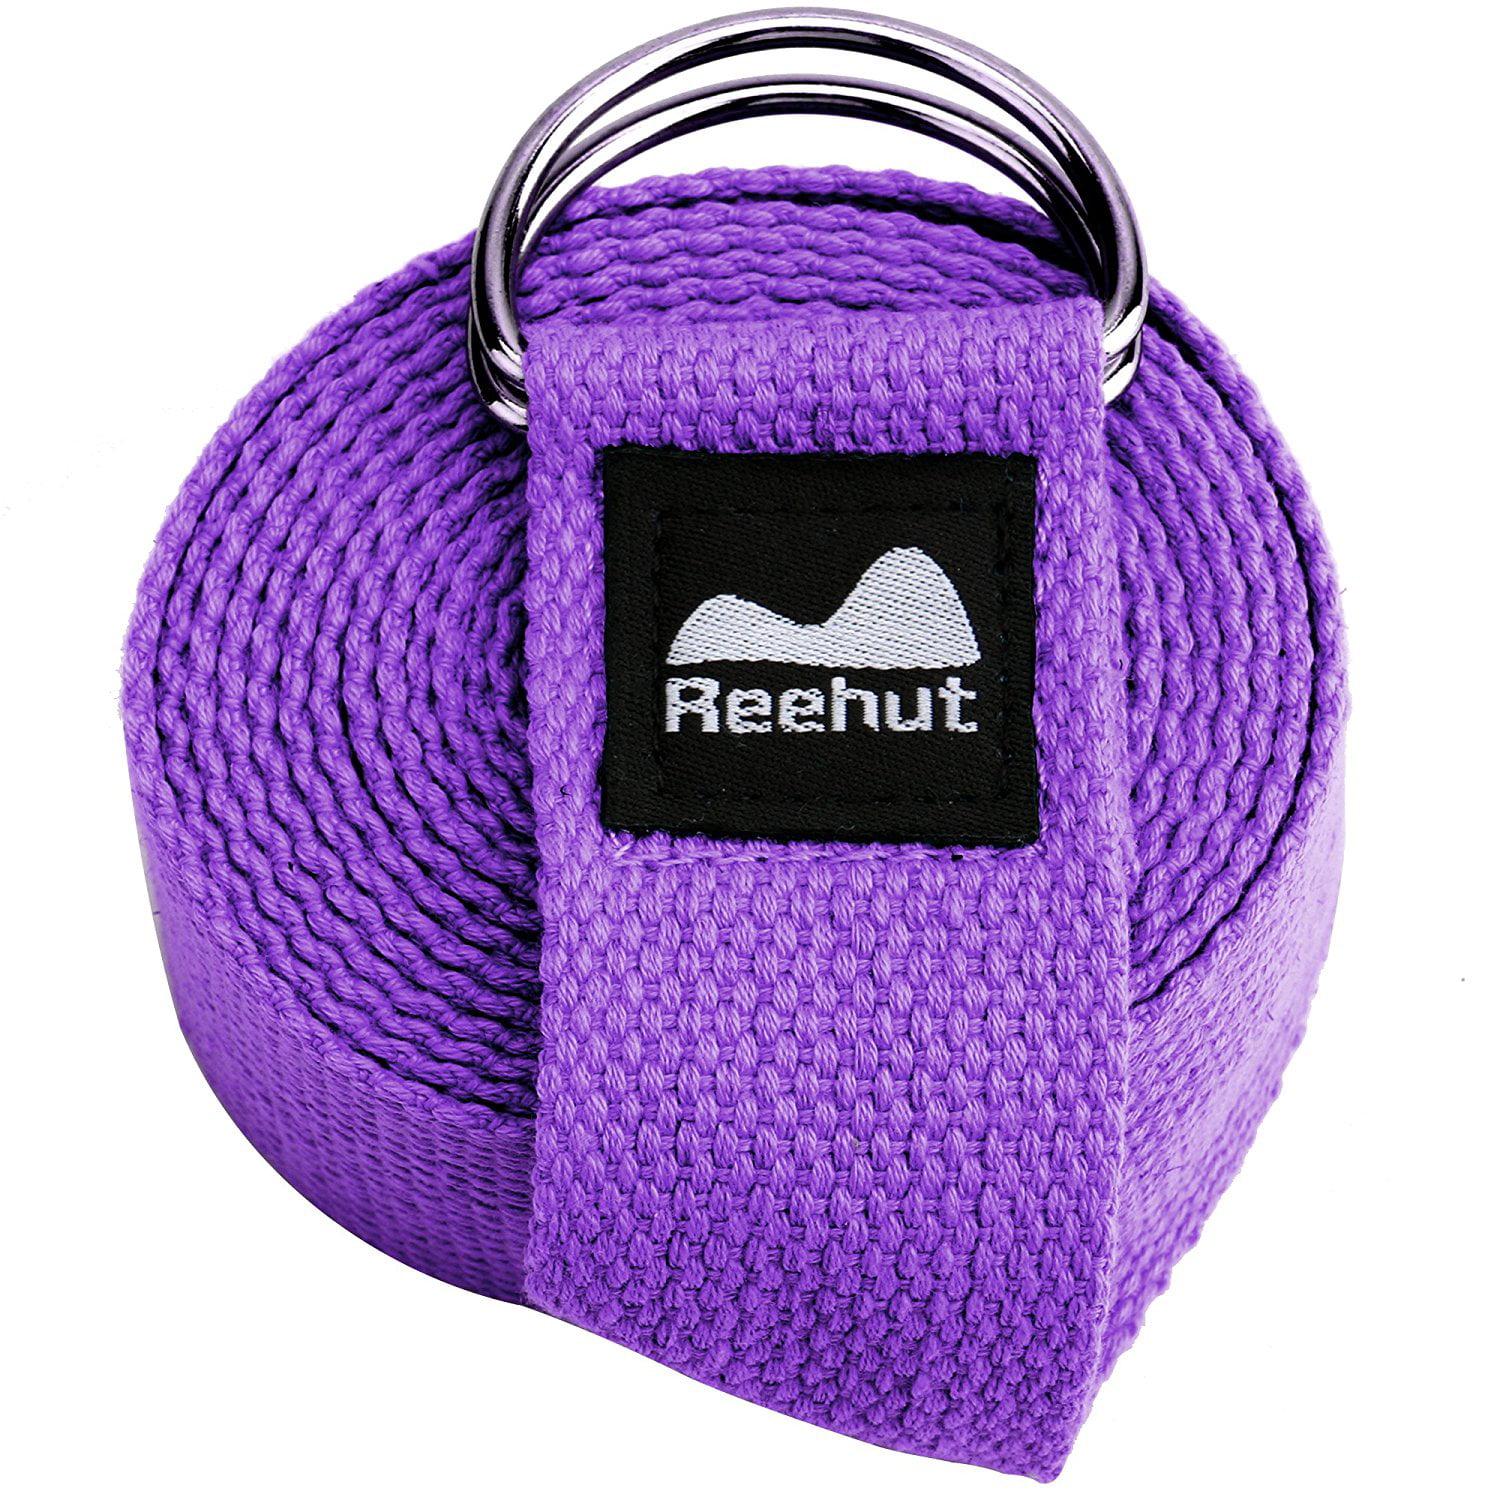 Reehut Fitness Exercise Yoga Strap w/ Adjustable D-Ring Buckle for  Stretching, Flexibility and Physical Therapy - (Purple, 6ft) 